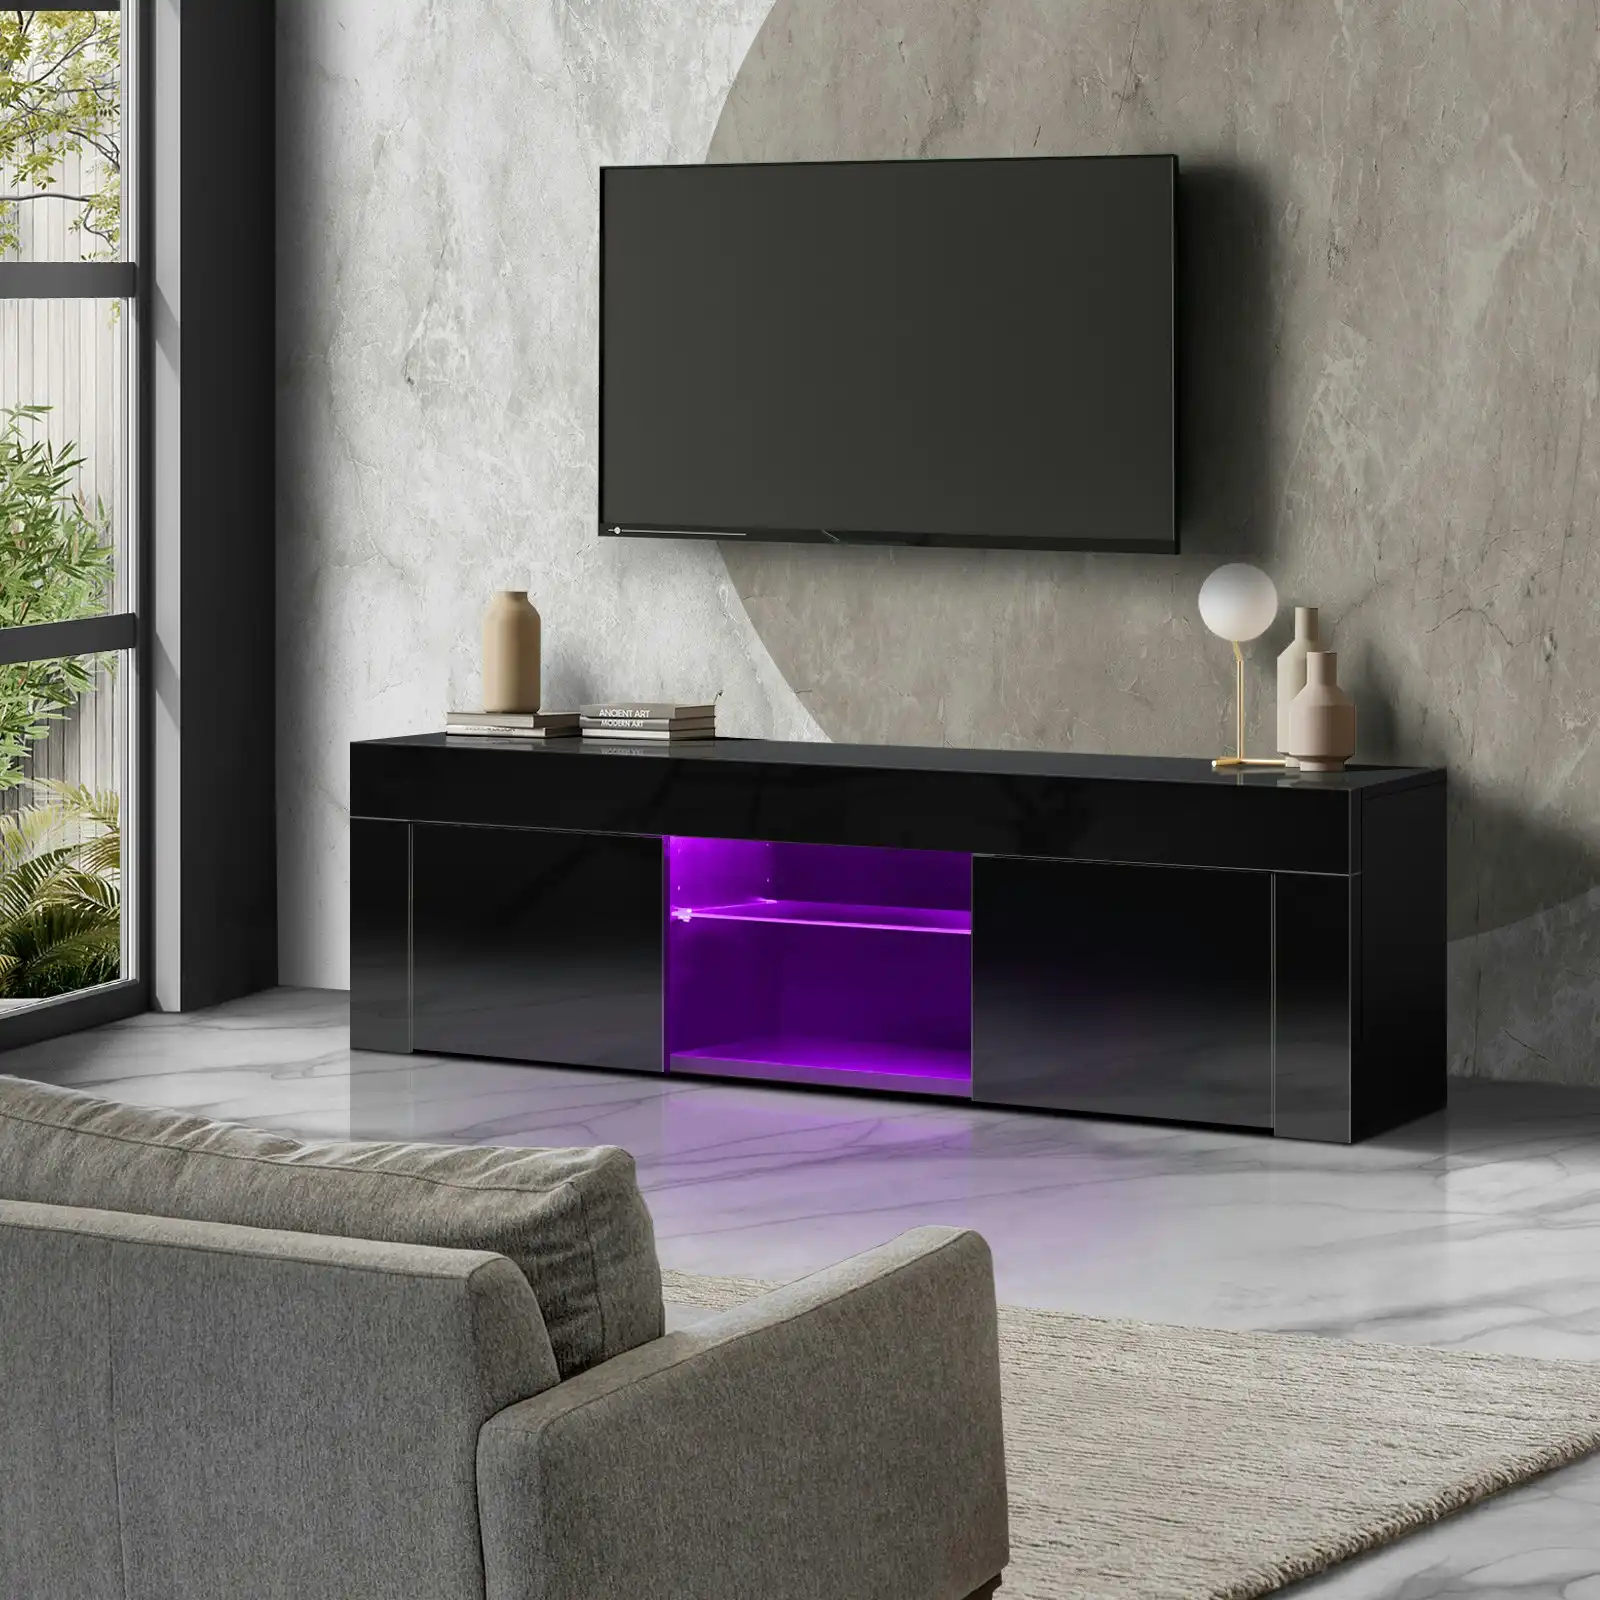 Oikiture TV Cabinet Entertainment Unit Stand RGB LED Gloss Furniture 130cm Black